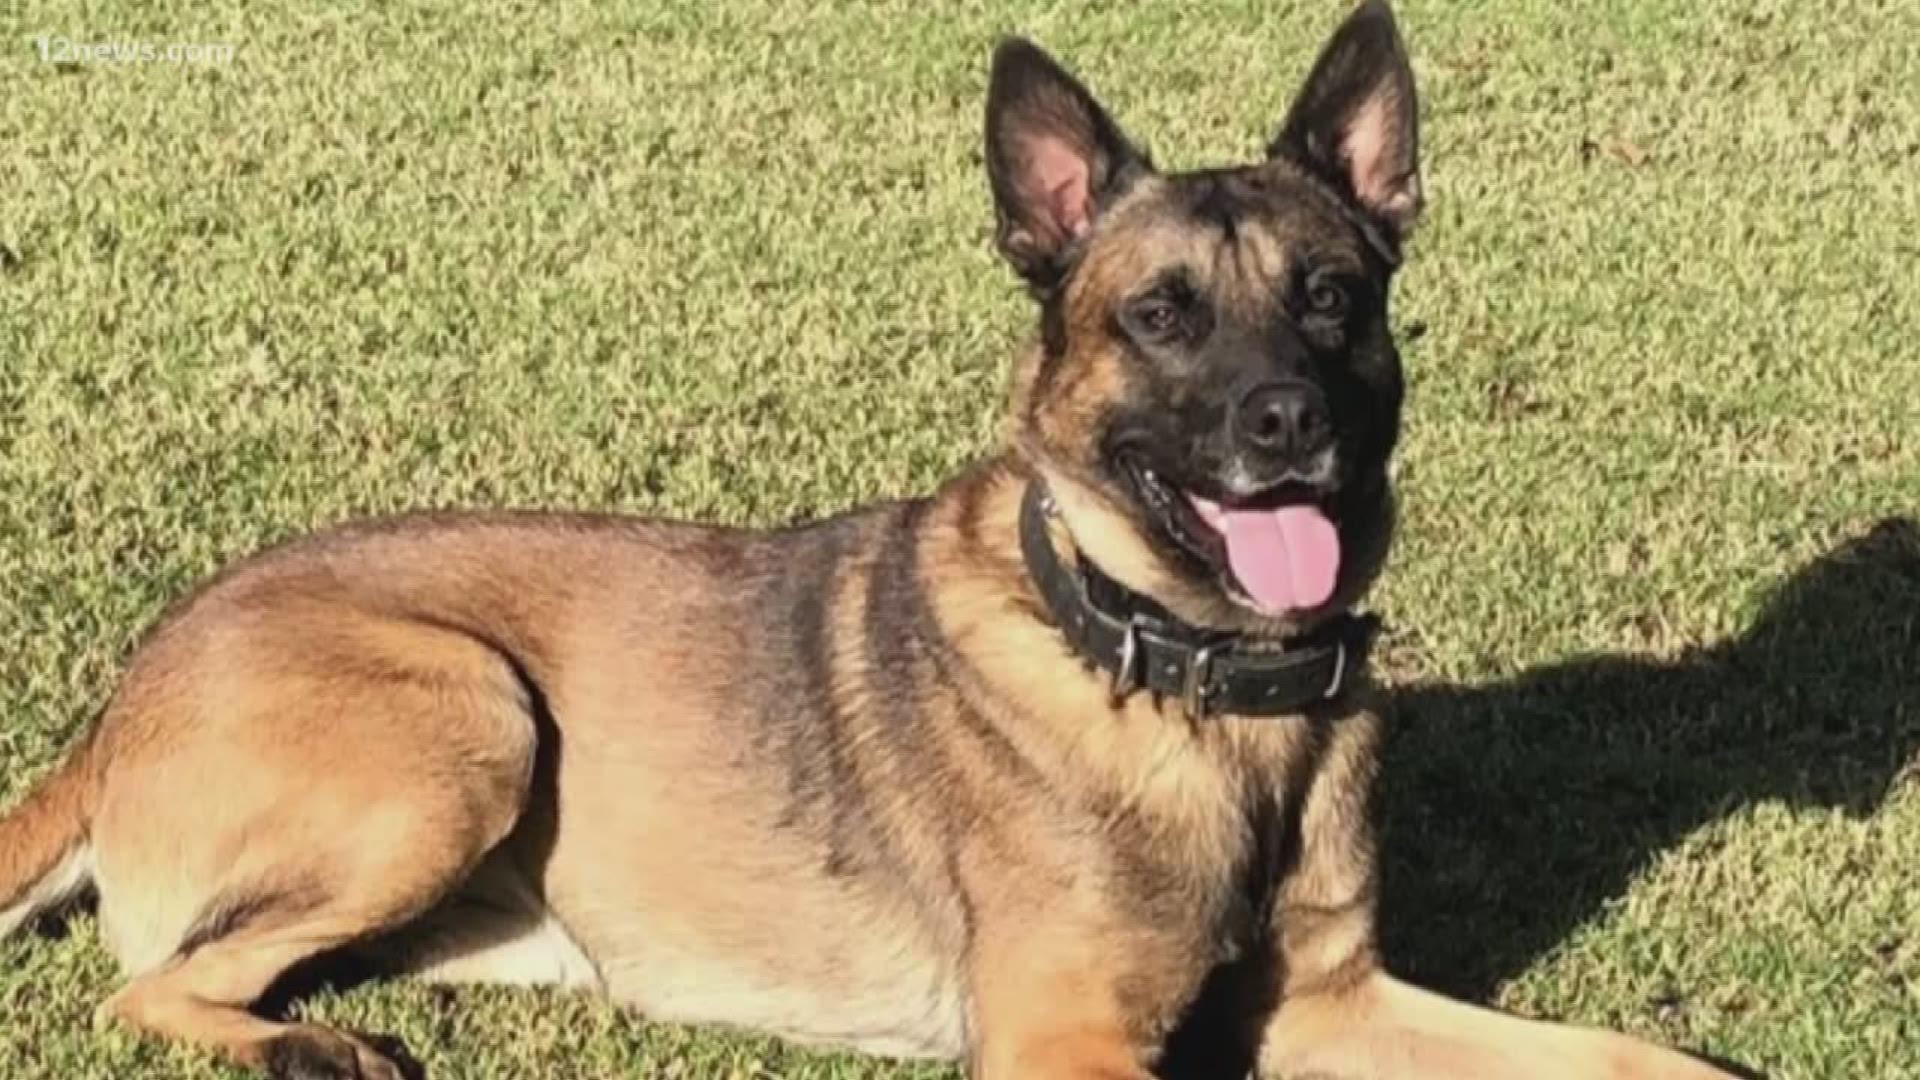 Dog lovers from across the Valley showed their support for the police K9 killed Tuesday after a police chase.